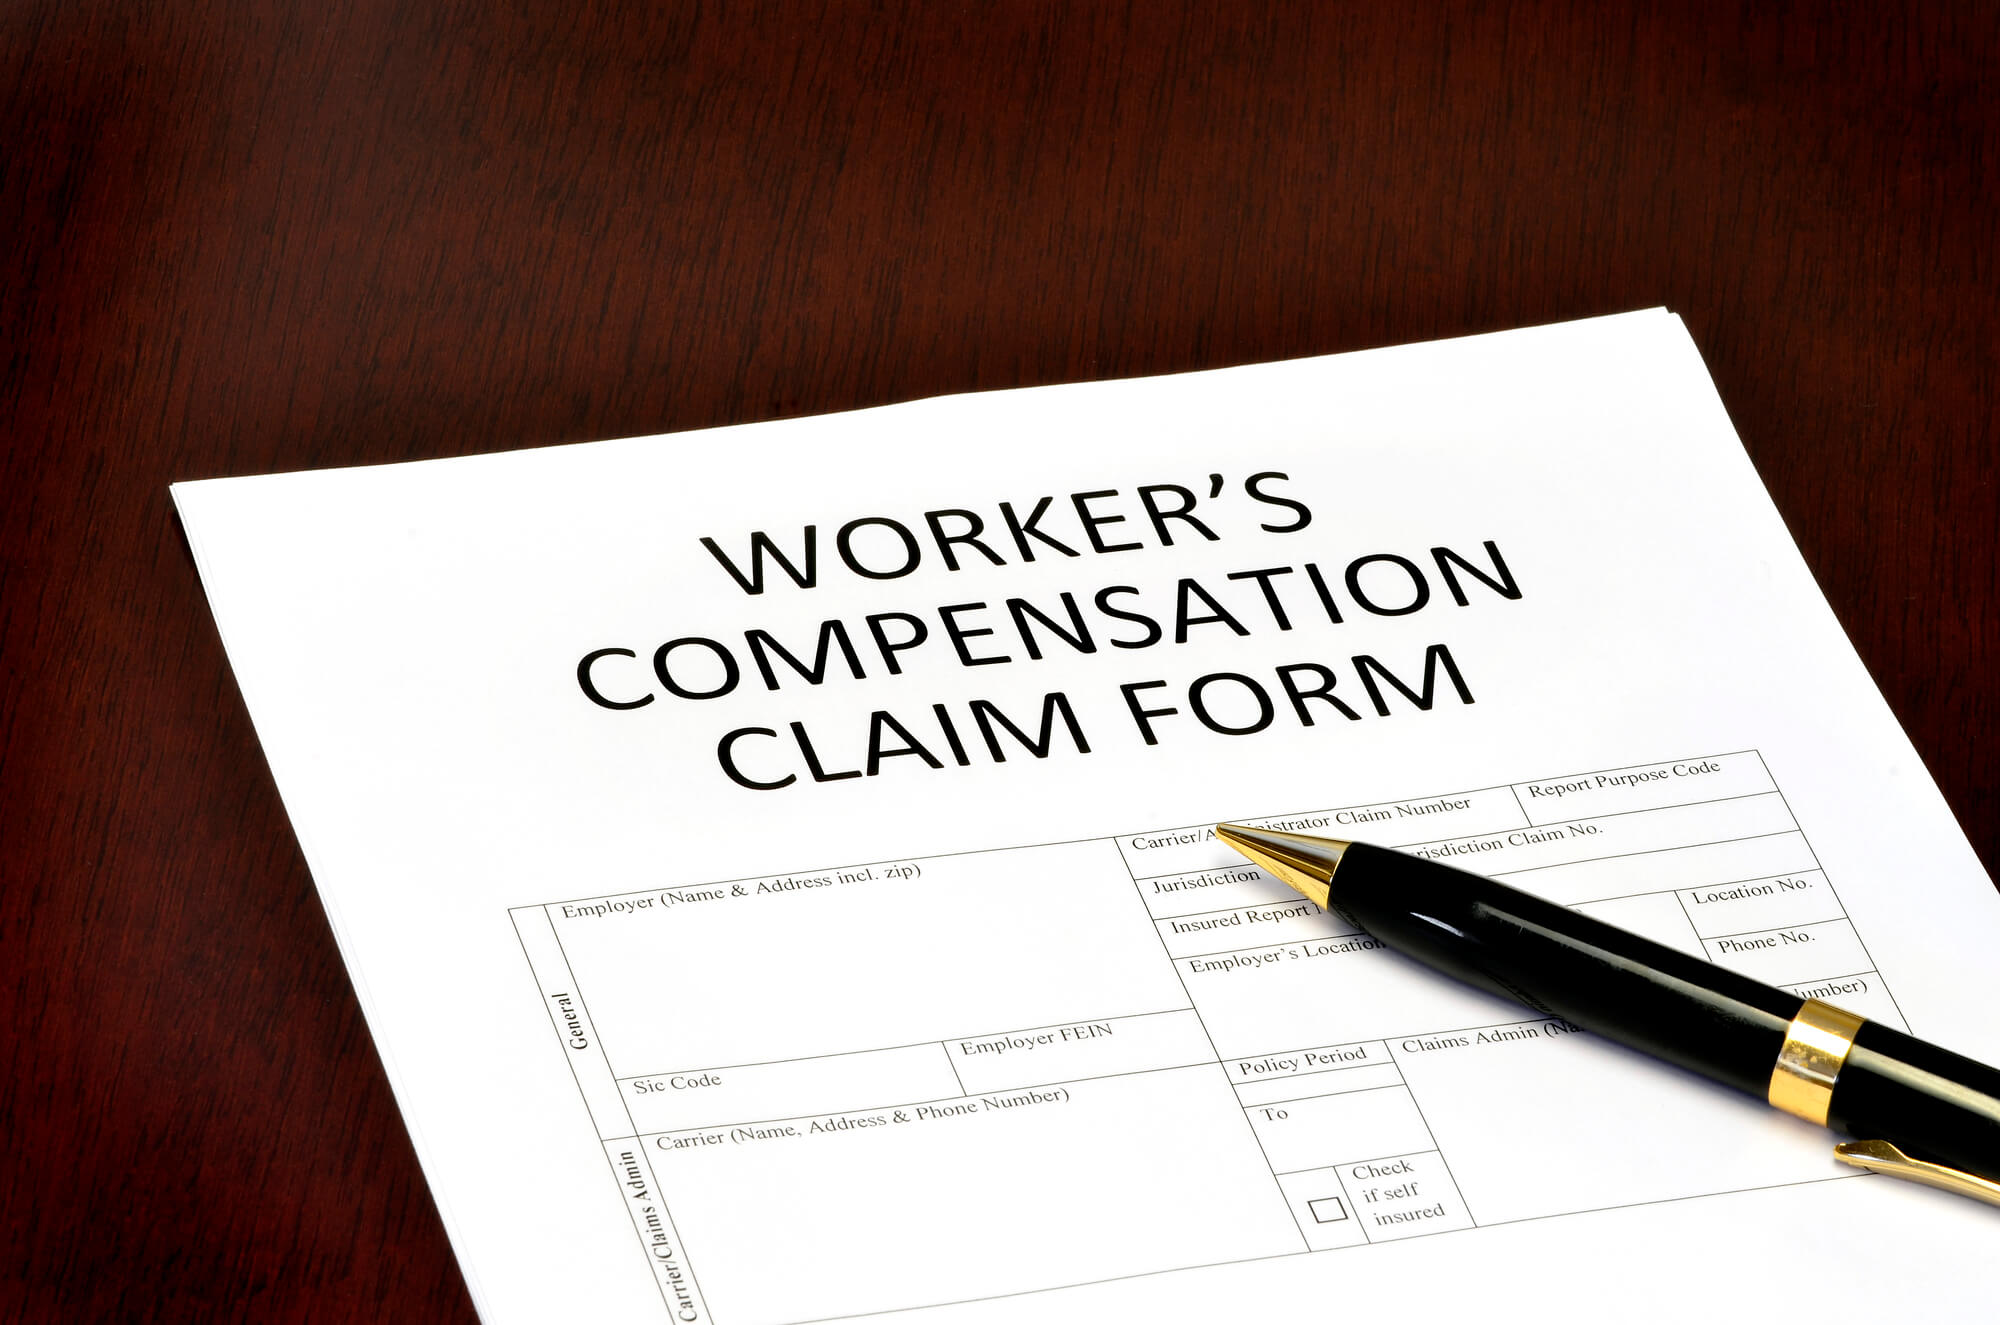 Workers’ Compensation and Who is Required to Have it